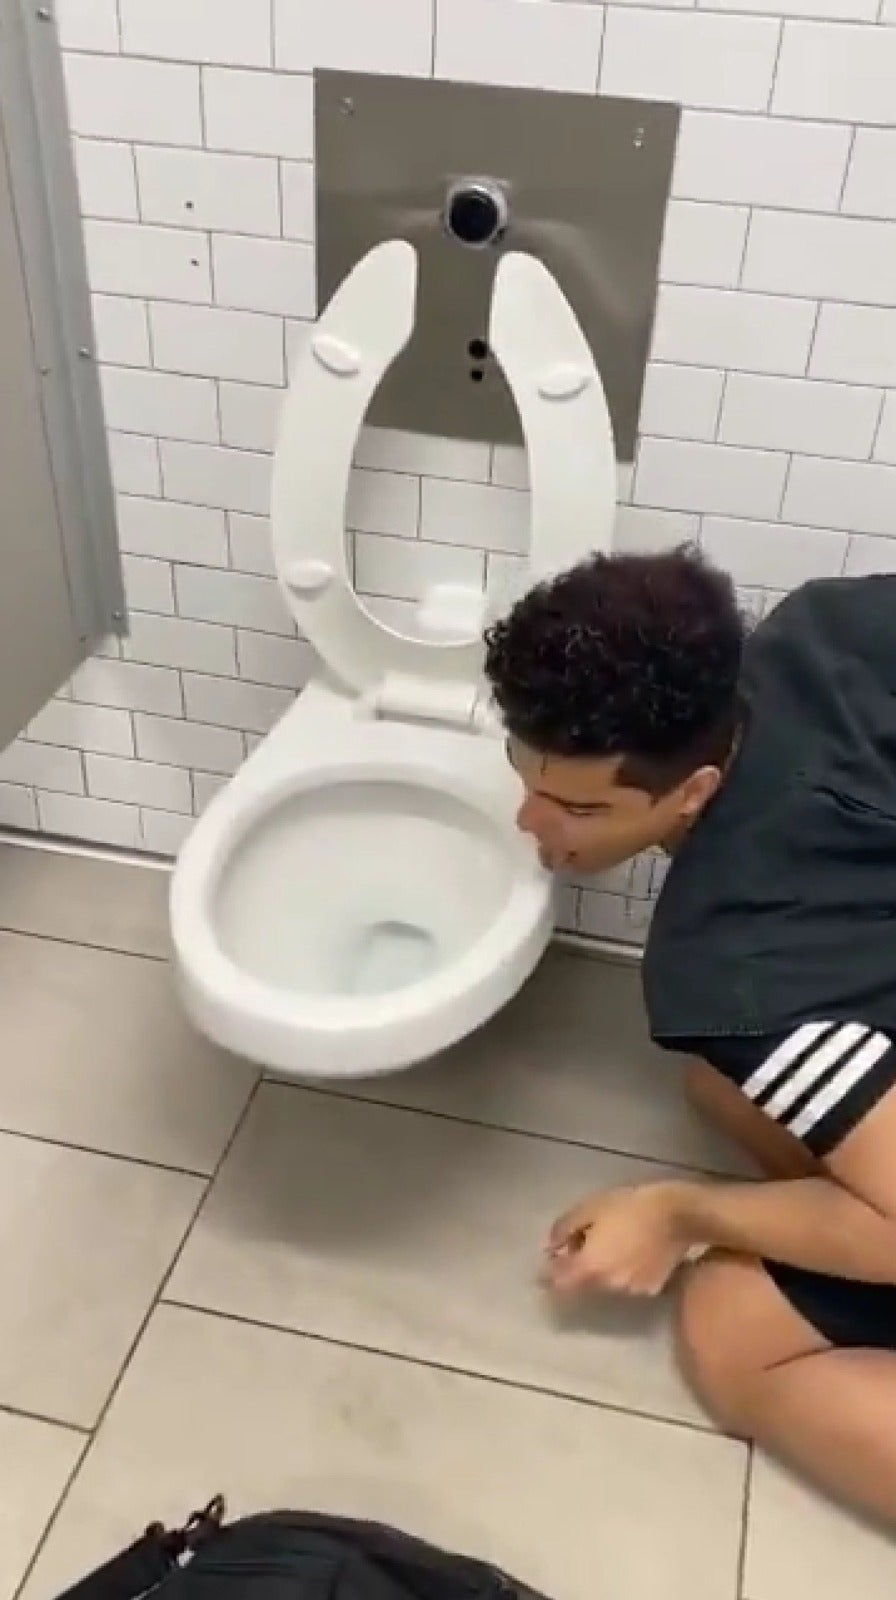 Influencer Who Licked Toilet Seat To Make Fun Of Covid-19 Tests Positive For The Virus - WORLD OF BUZZ